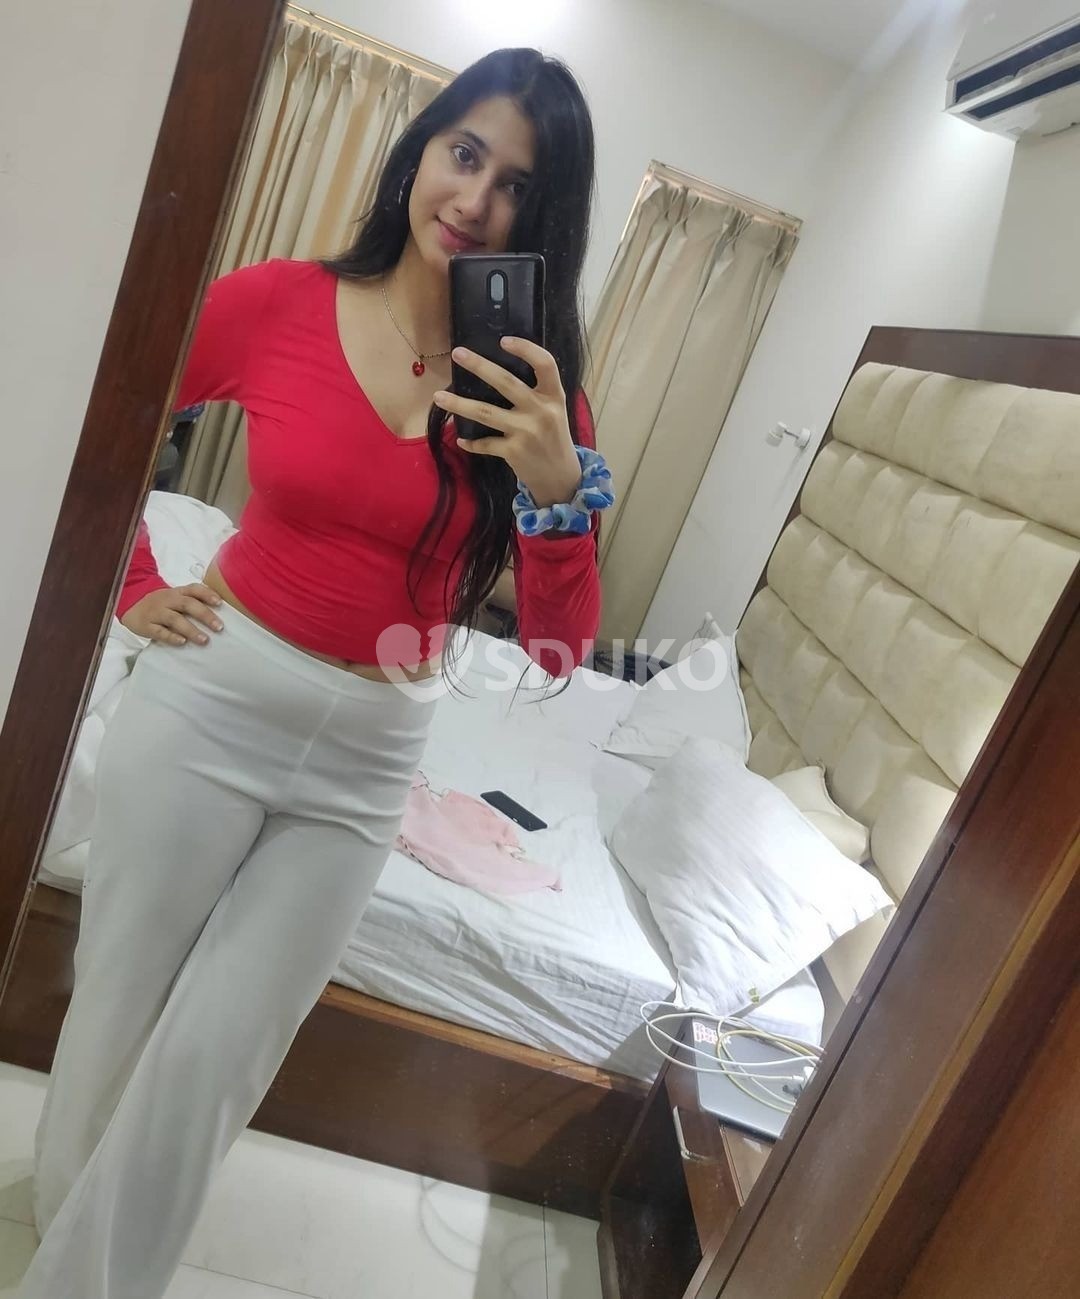 New town escort VIP call girl Miss Divya 24×7 hours available ✅♥️✅♥️✅